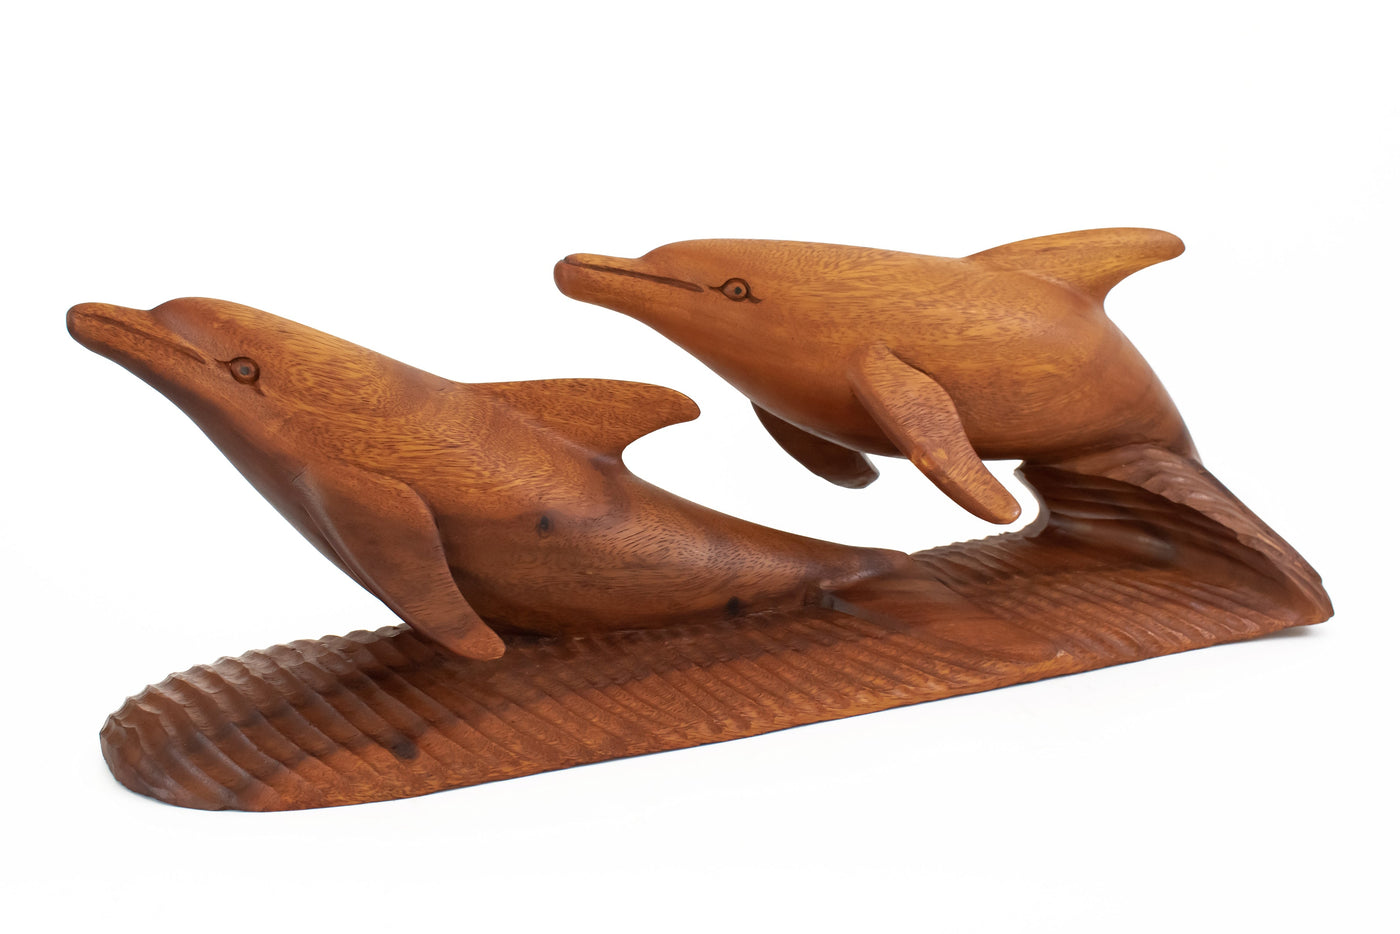 20" Large Wooden Hand Carved 2 Dolphins Statue Sculpture Wood Decor Accent Fish Figurine Handcrafted Handmade Seaside Tropical Nautical Ocean Coastal